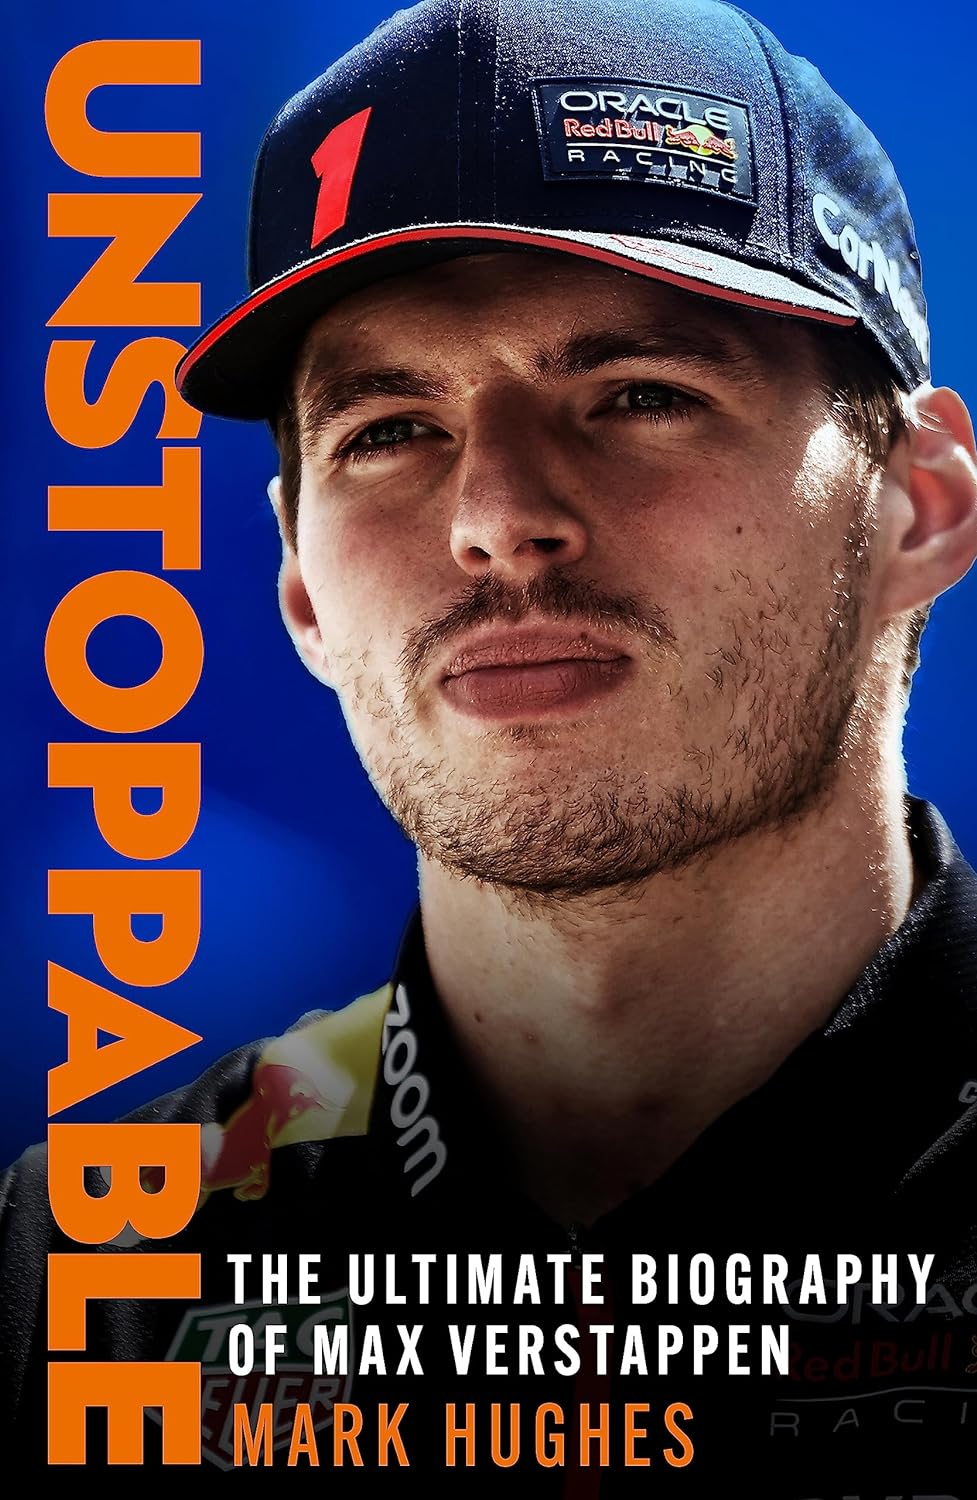 Unstoppable: The Ultimate Biography of Max Verstappen